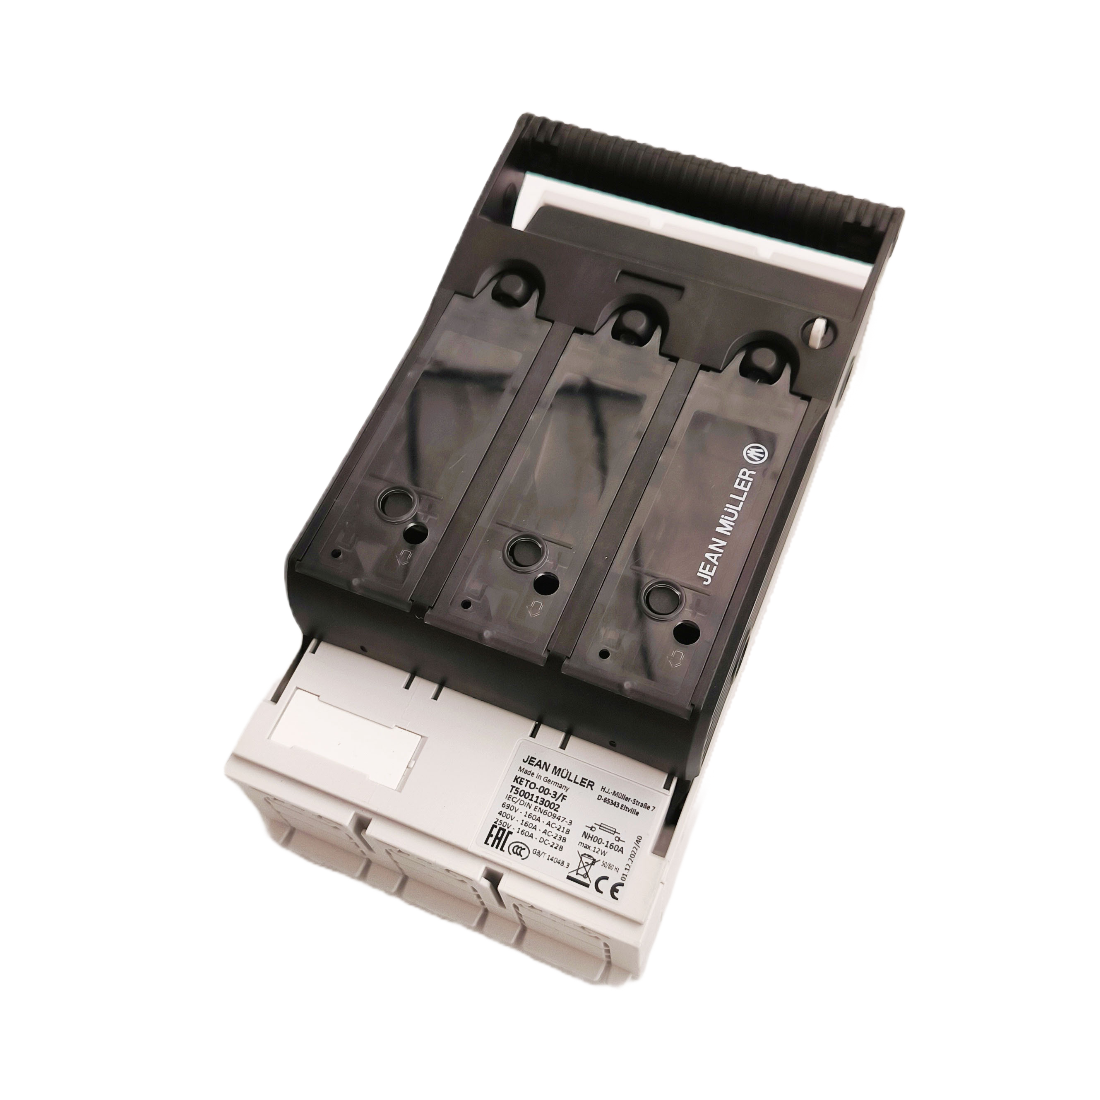 Jean Muller KETO-00 Battery Disconnector with 125A Fuses